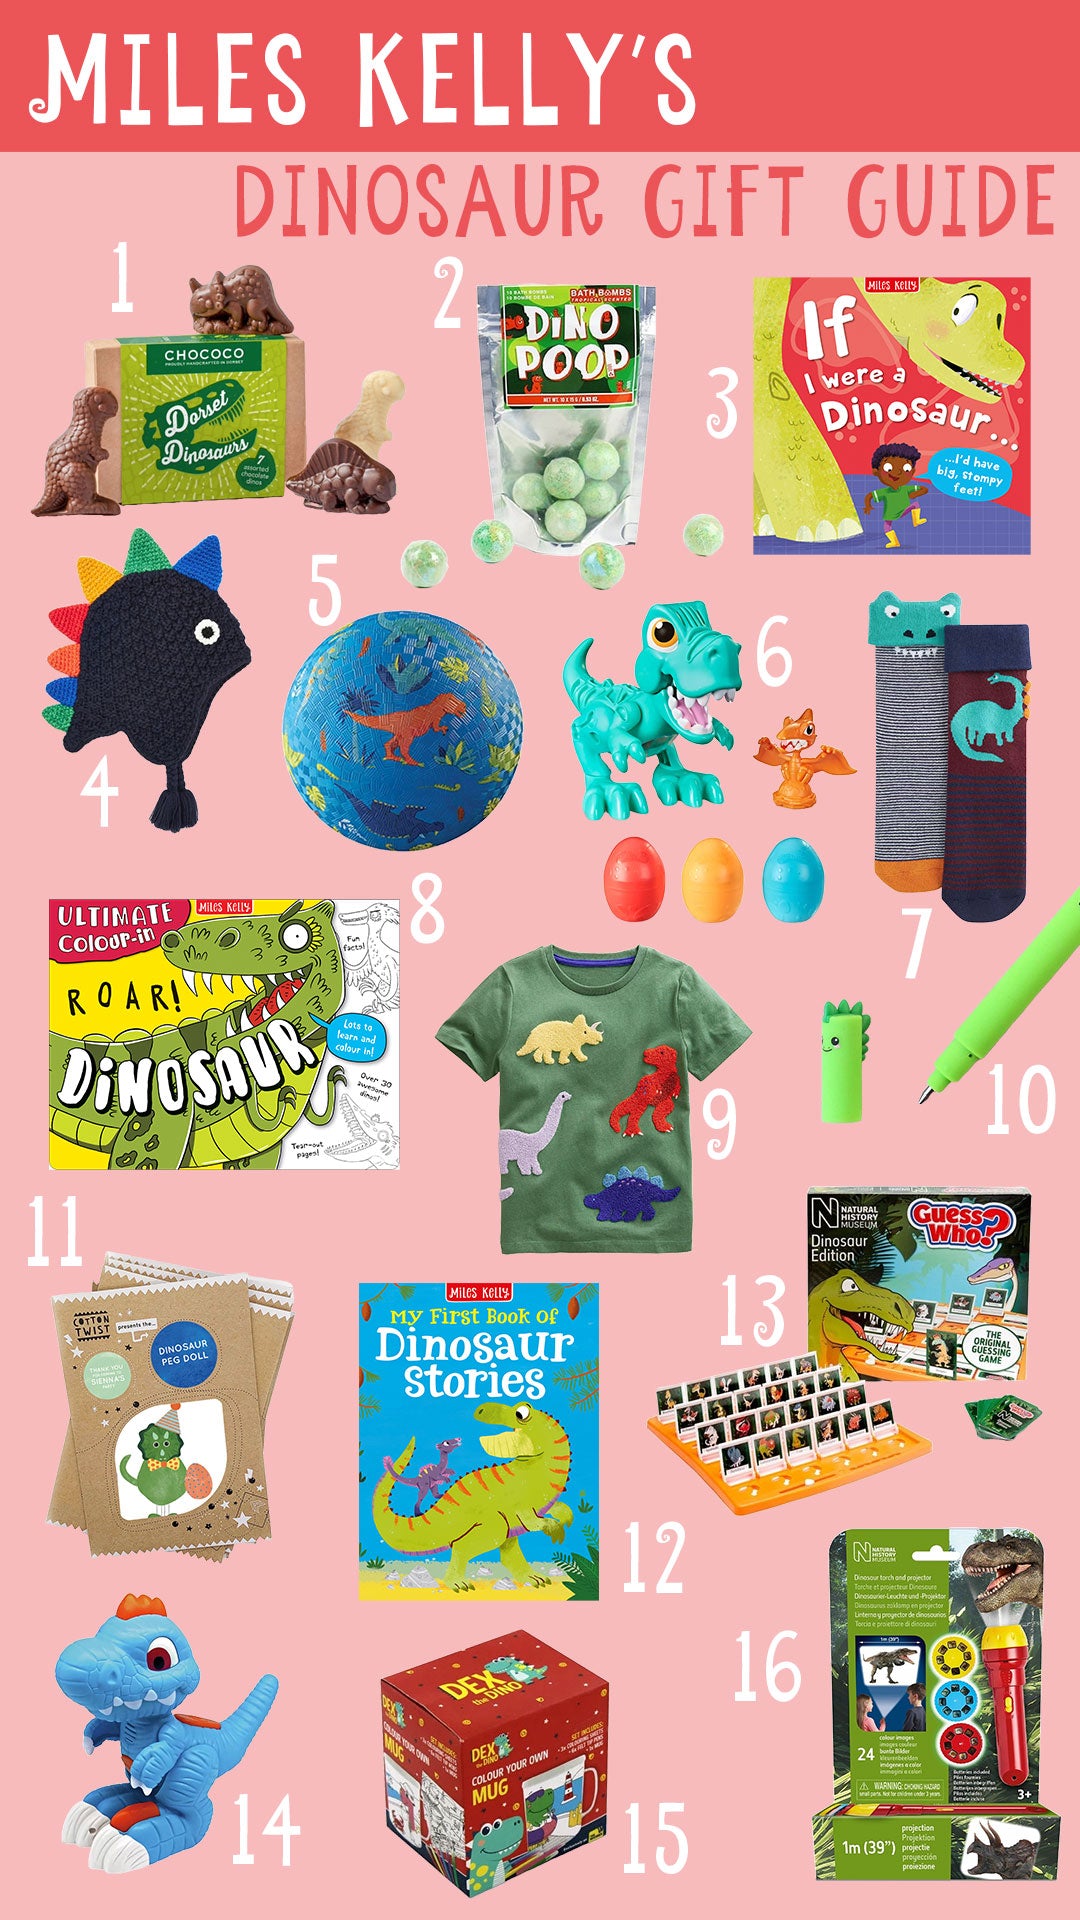 Dinosaur toys and gifts for kids – a Christmas Gift Guide by Miles Kelly